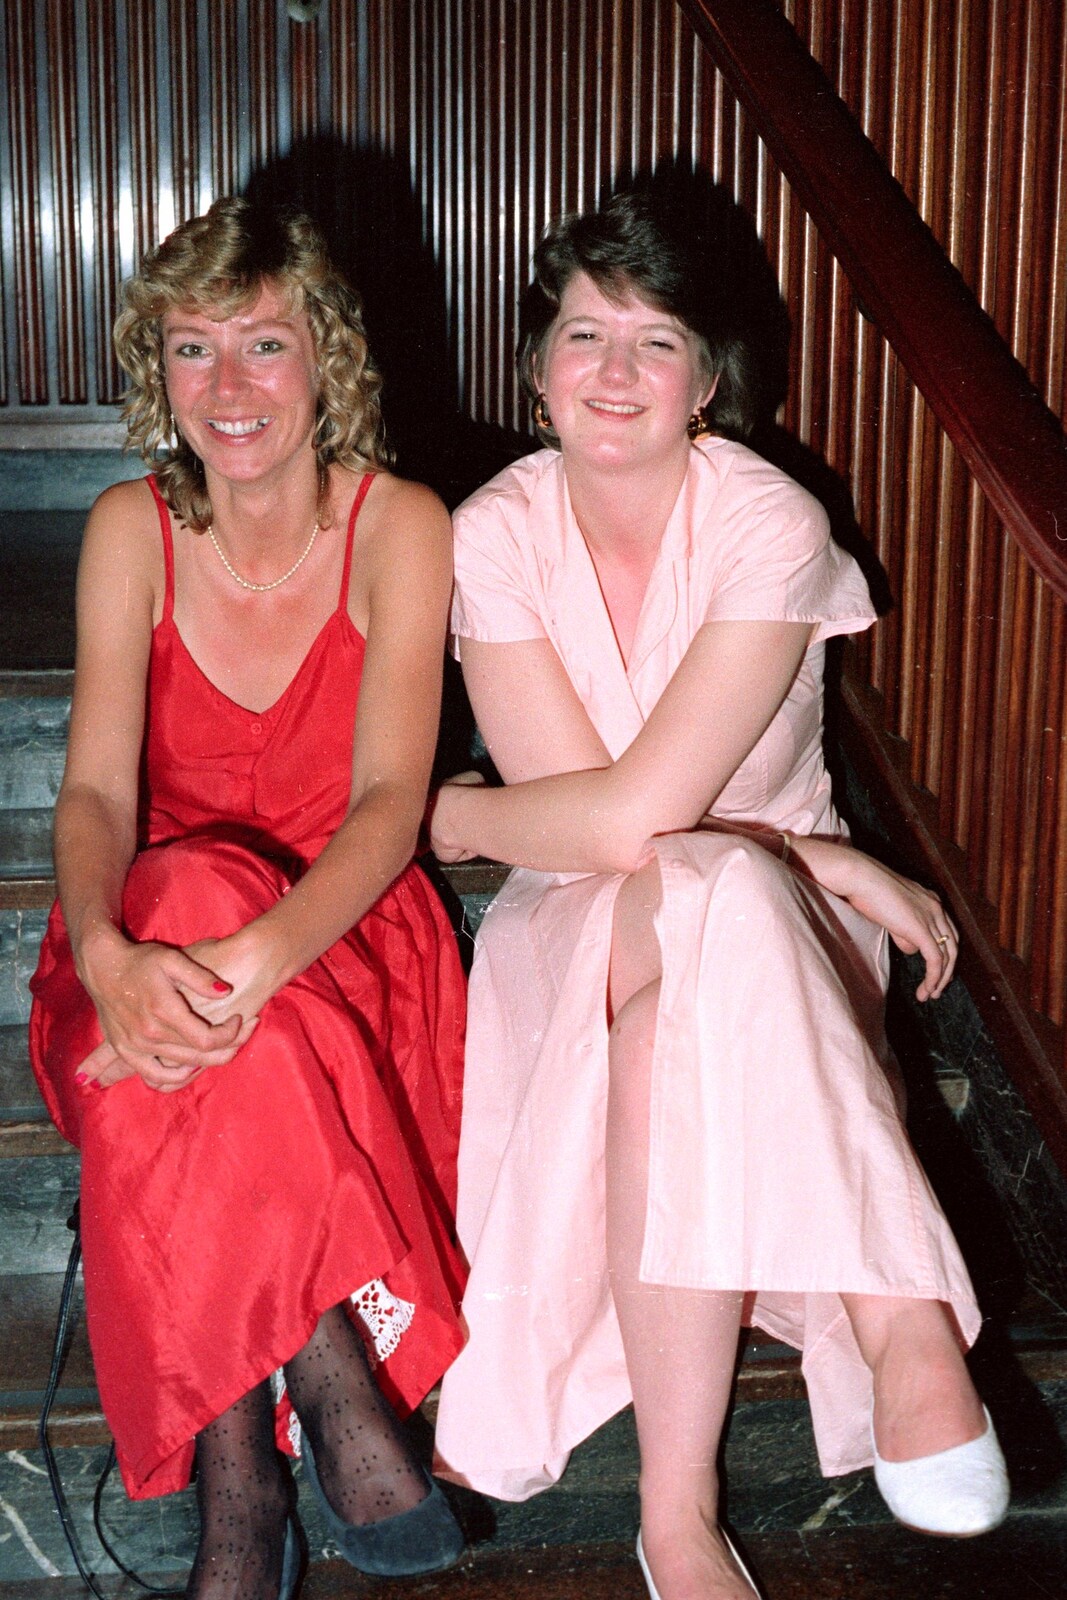 Sitting on the stairs from Uni: PPSU May Ball, The Guildhall, Plymouth - 4th May 1987